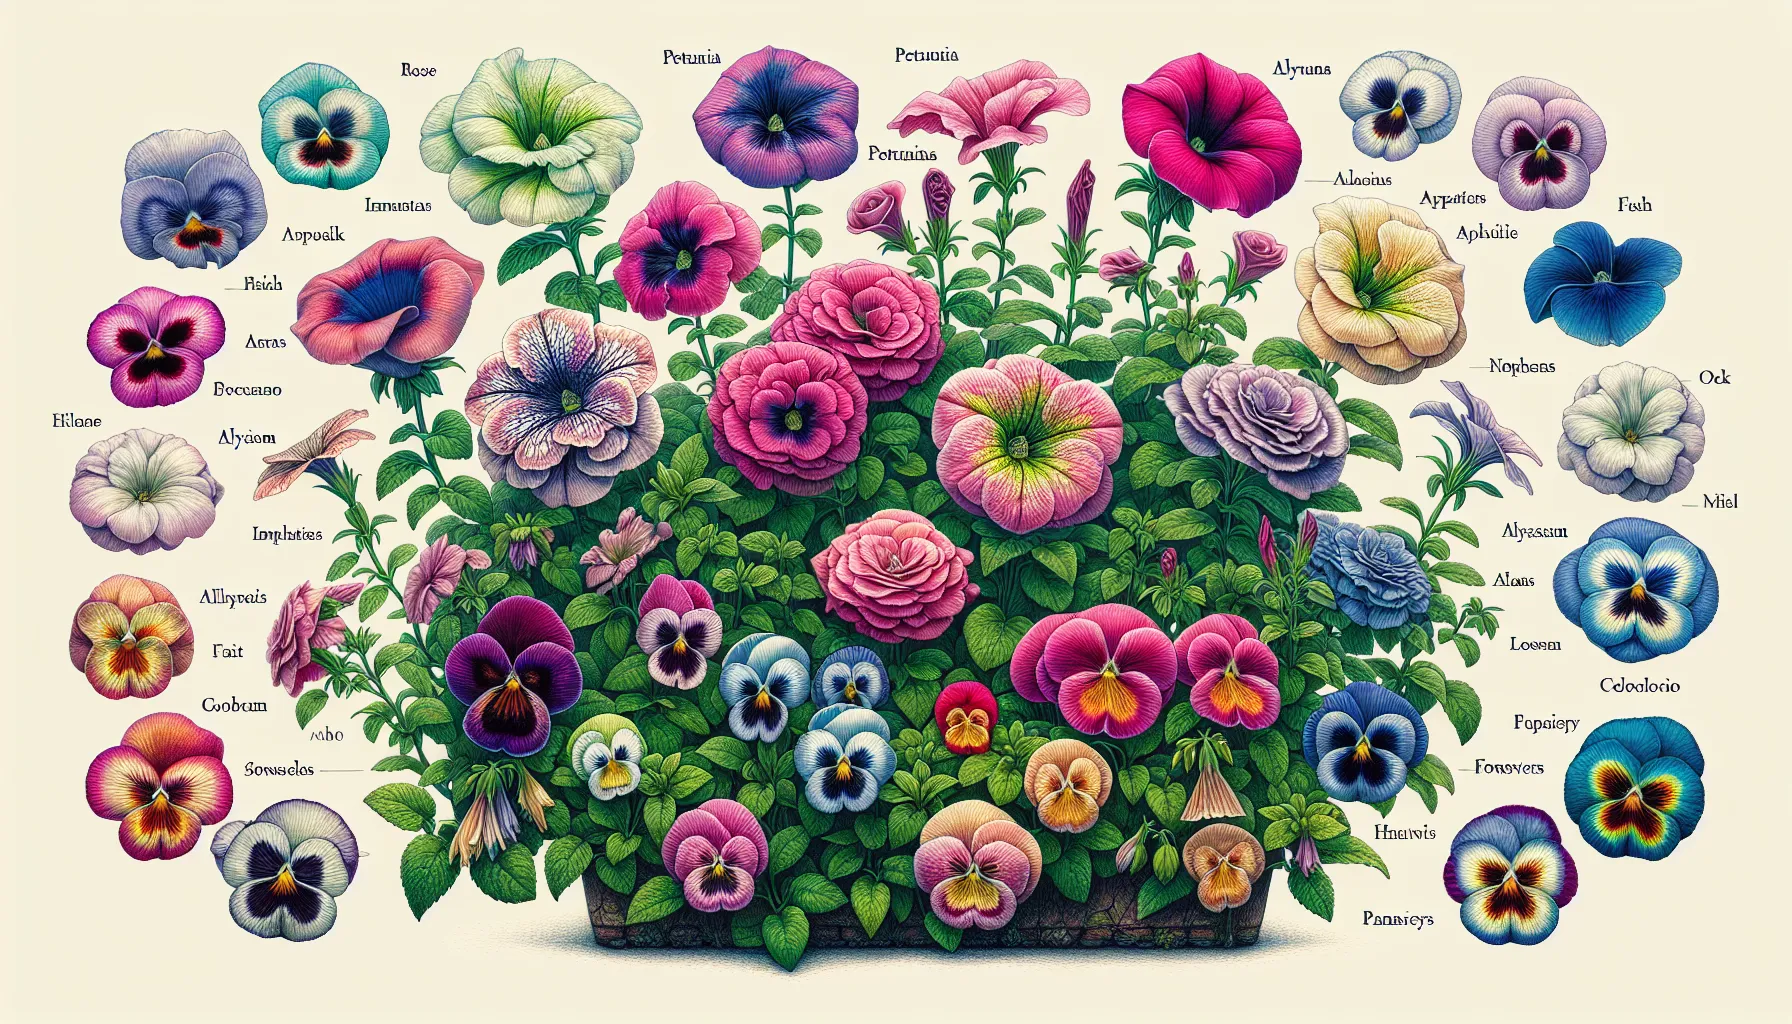 Alt text: An illustration displaying a variety of small flowers types with their names labeled, including roses and petunias, arranged on a bushy green background.